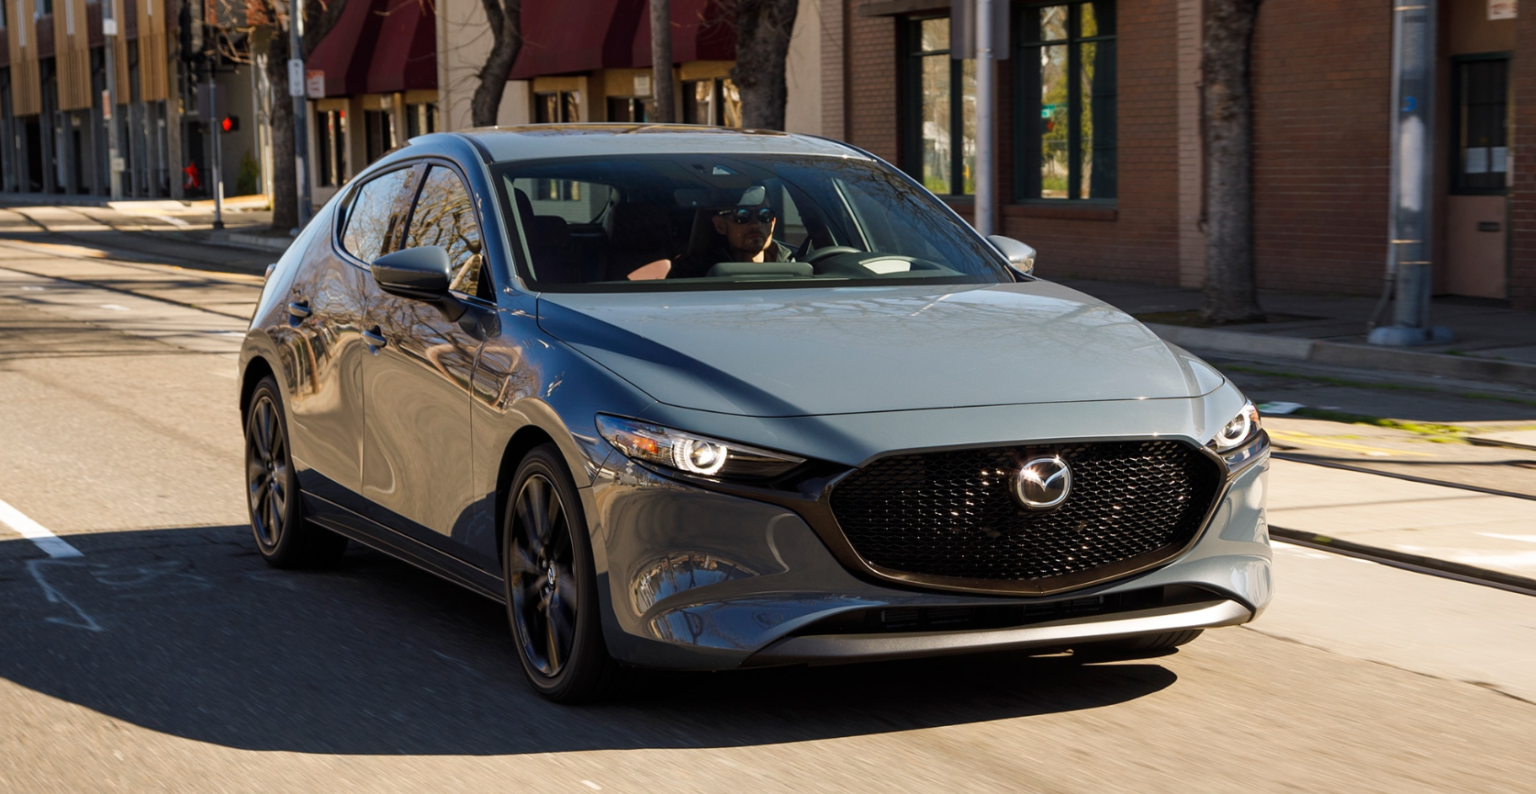 2025 Mazda 3 And Electrification Planning On The Way